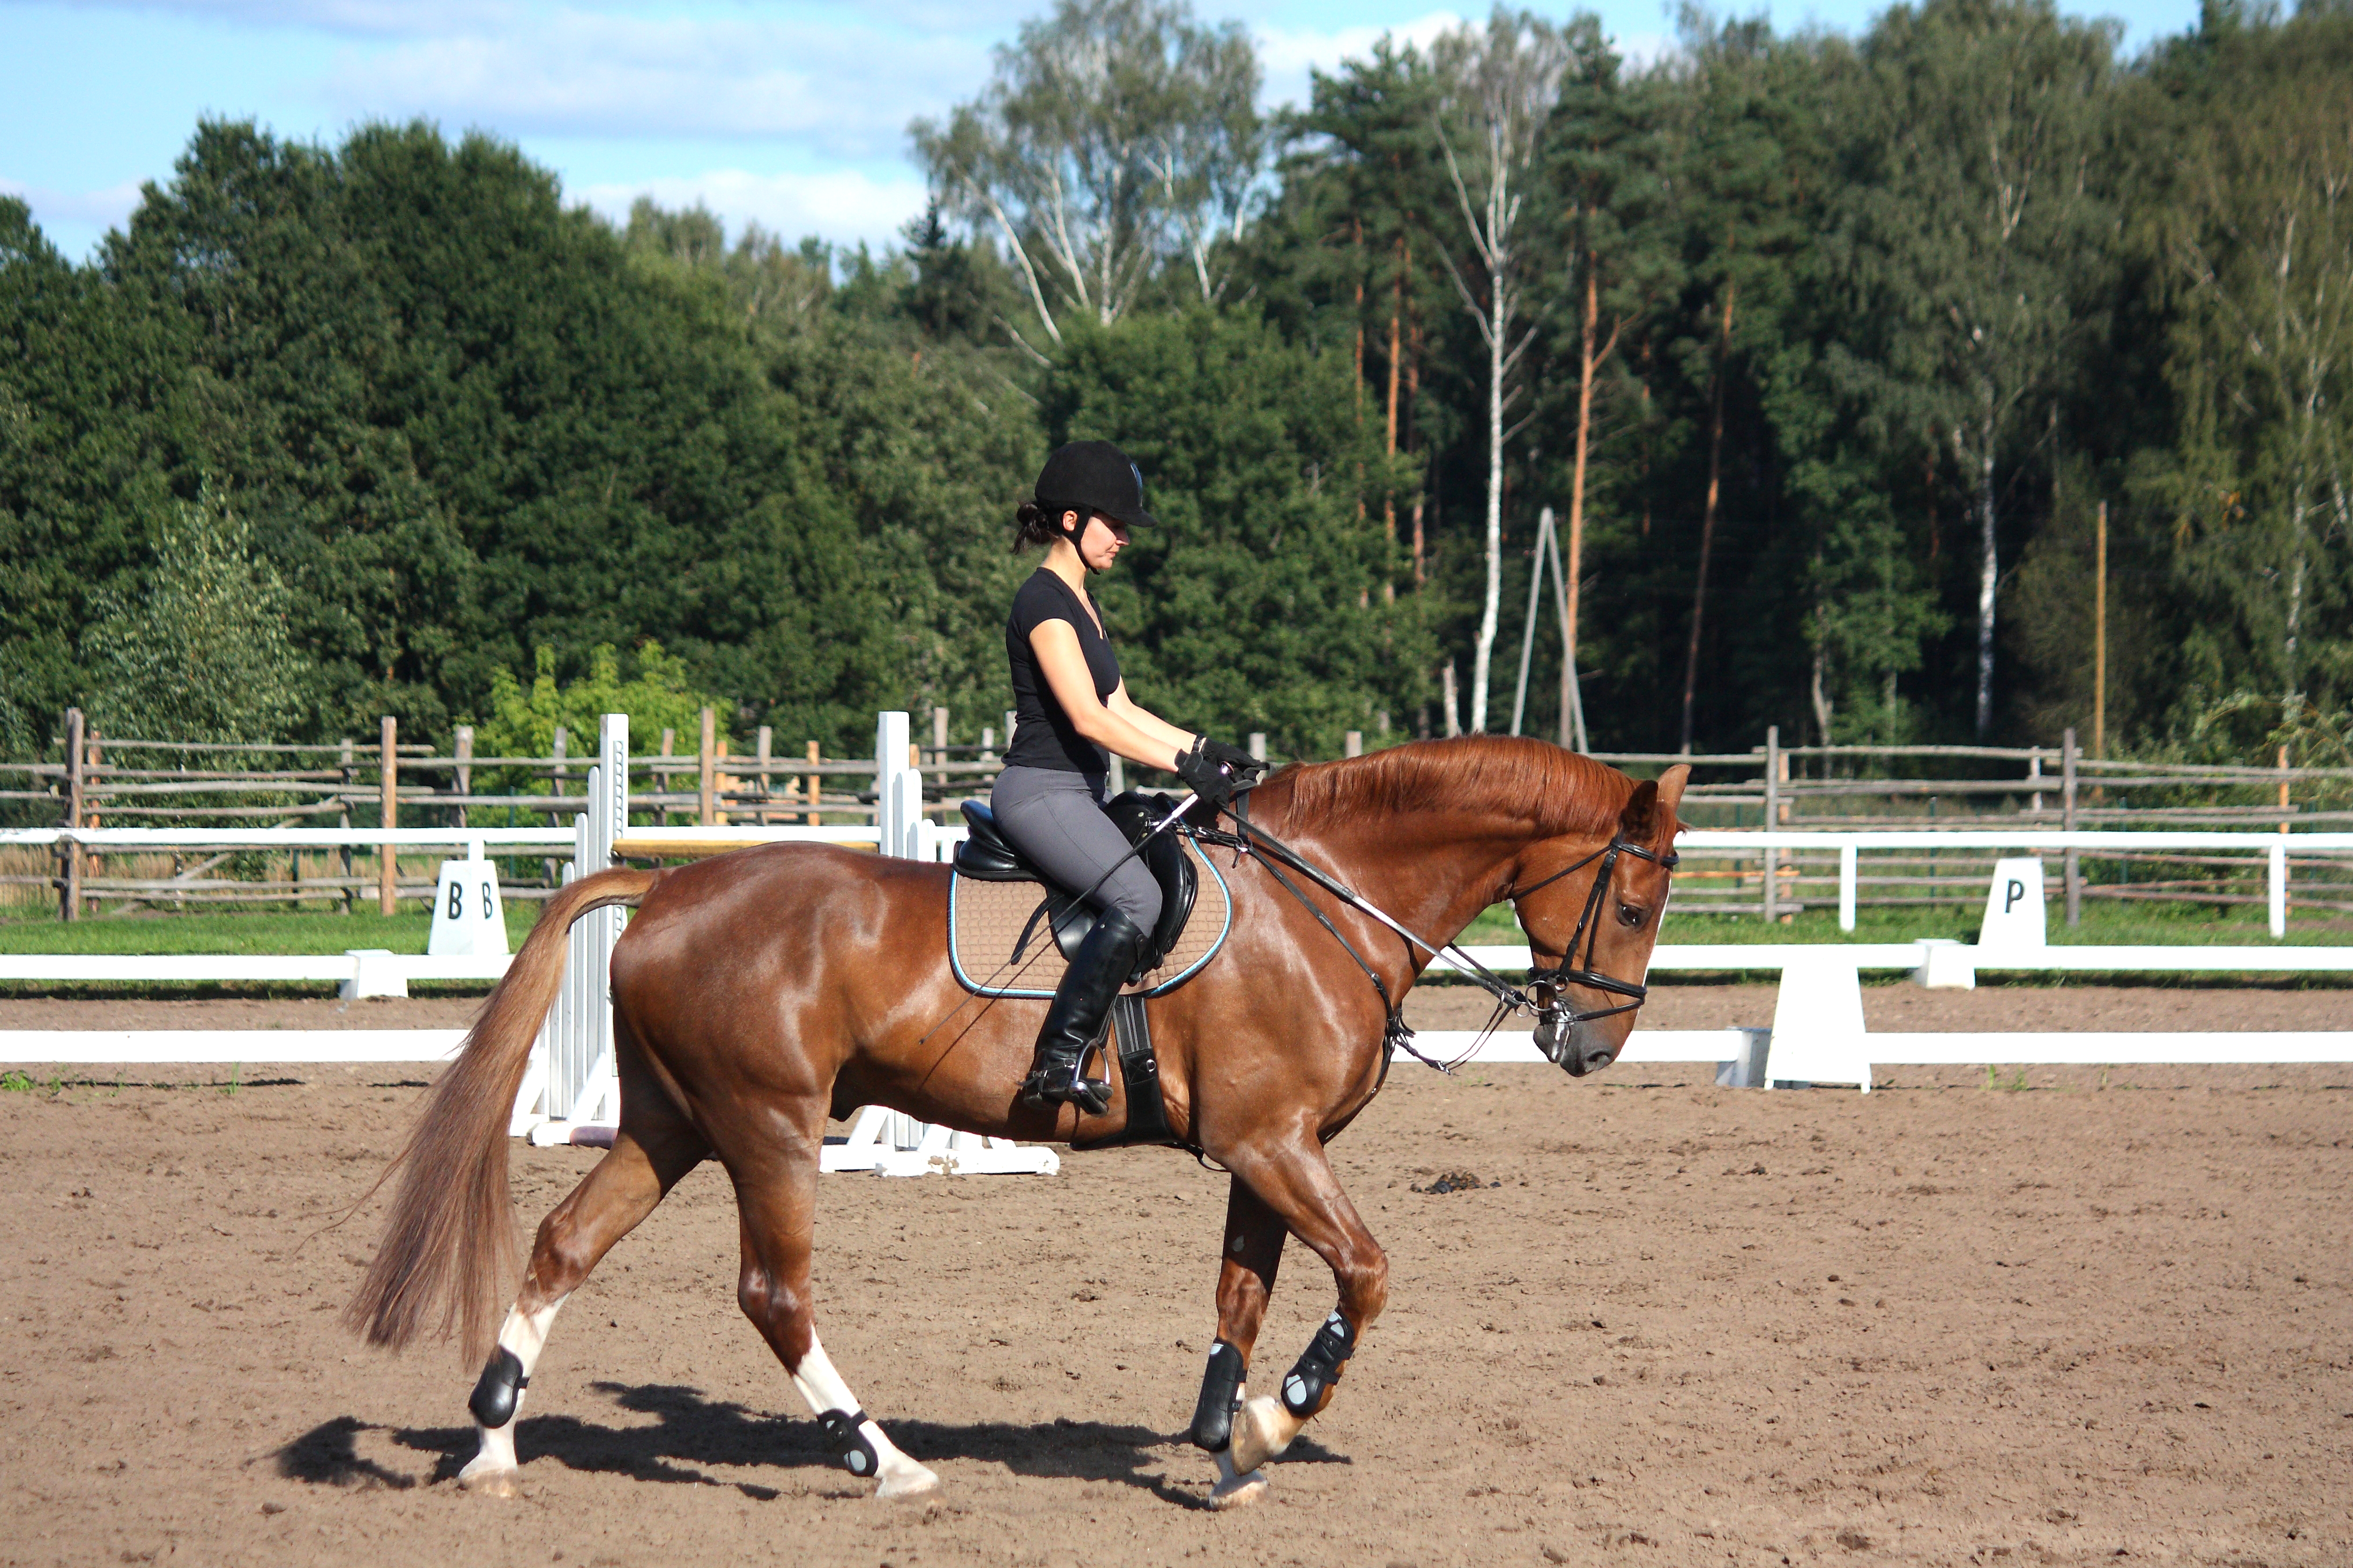 Horse and rider in arena